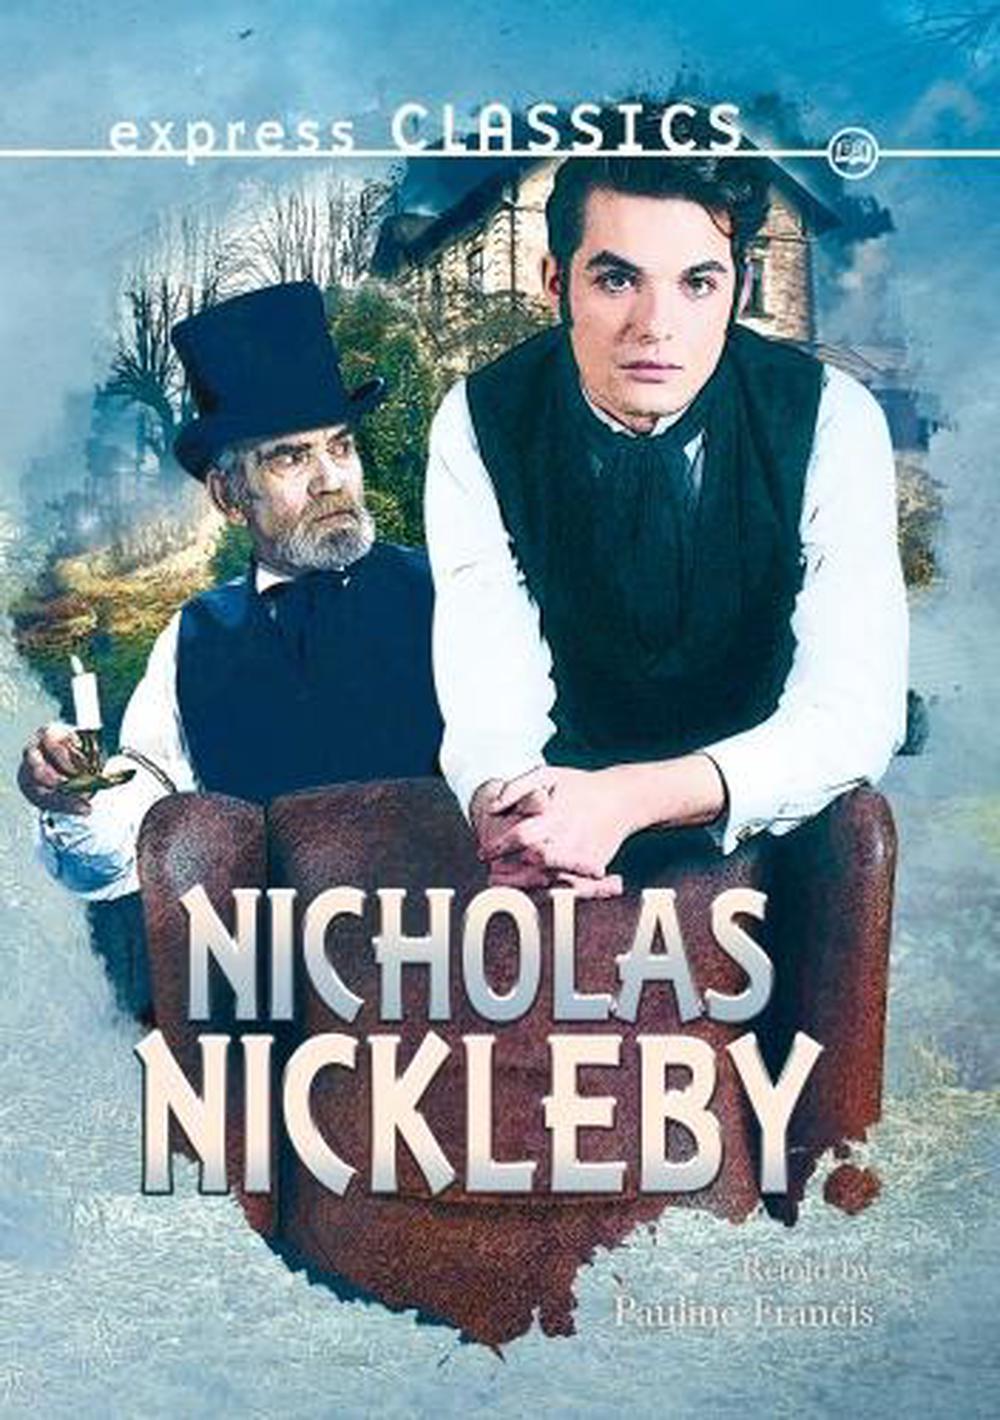 charles dickens the life and adventures of nicholas nickleby